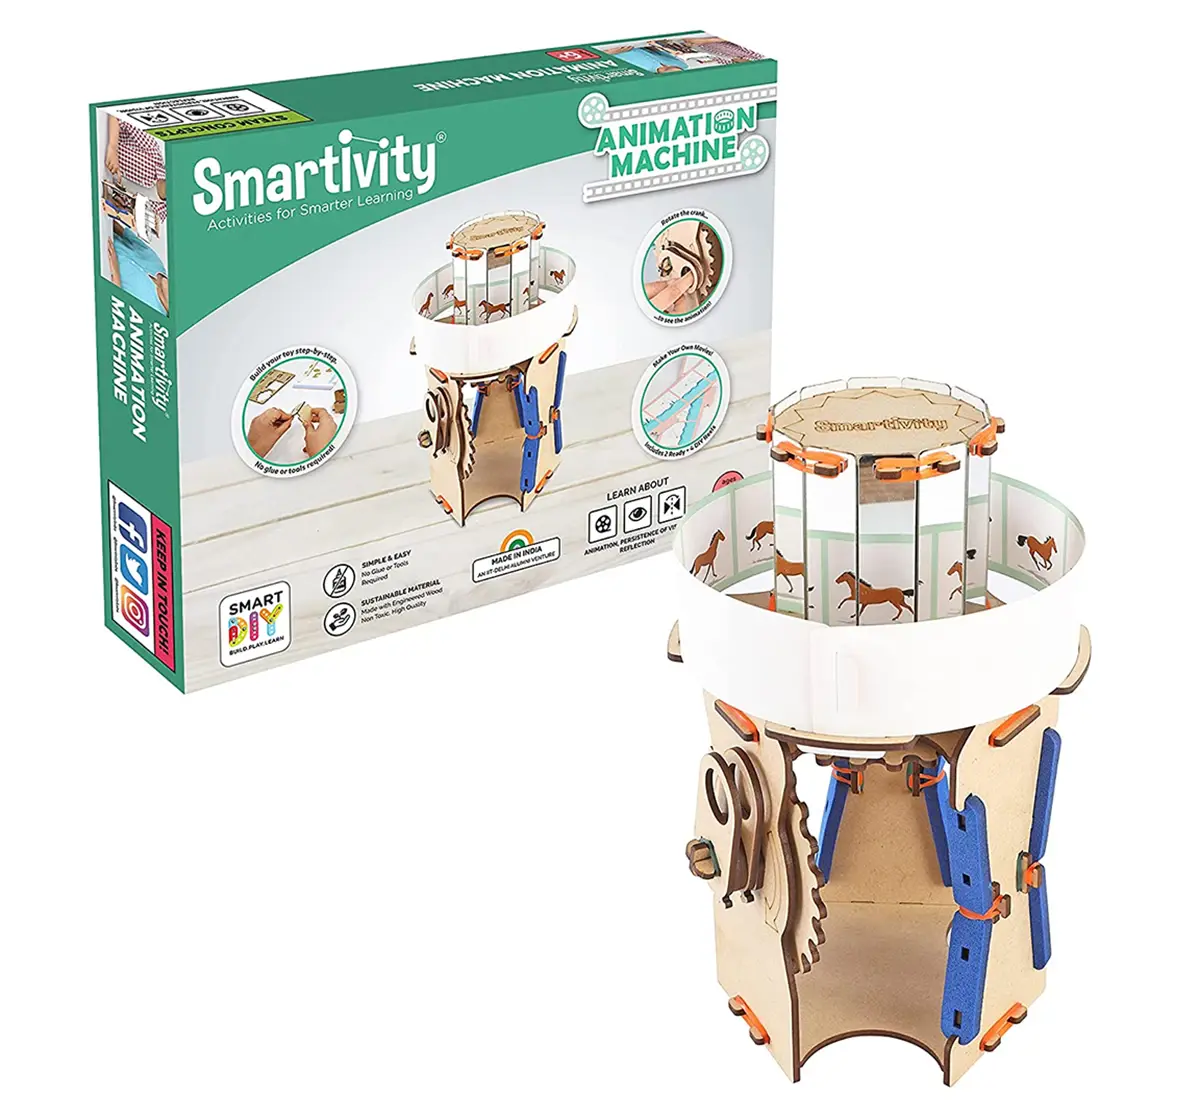 Smartivity Animation Machine STEAM Educational DIY Fun Toys, Educational & Construction based Activity Game for Kids 6 to 14yrs